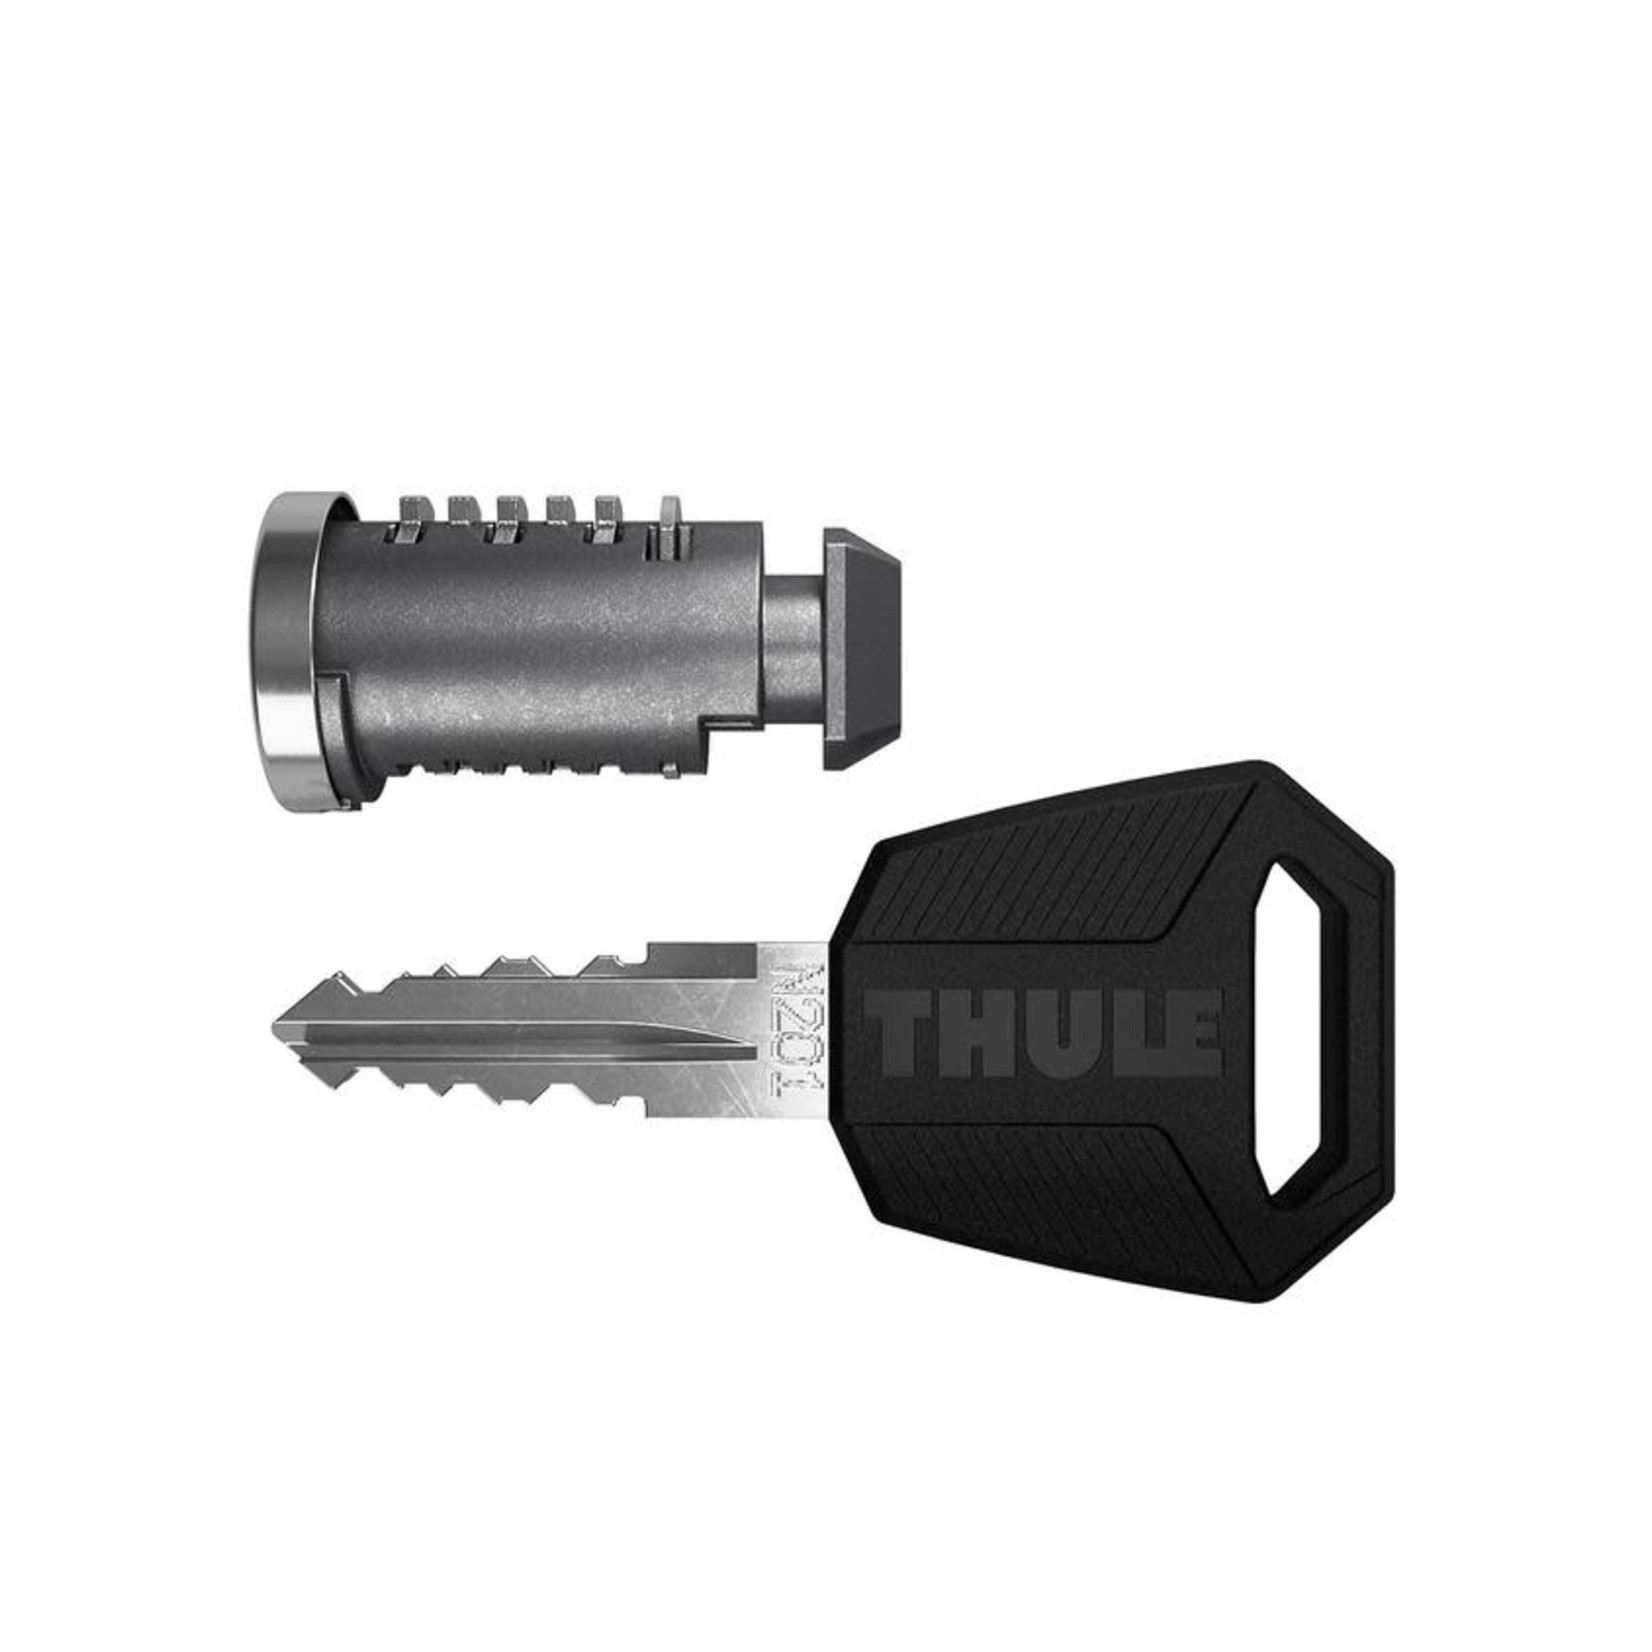 Thule One Key System - 4 Pack